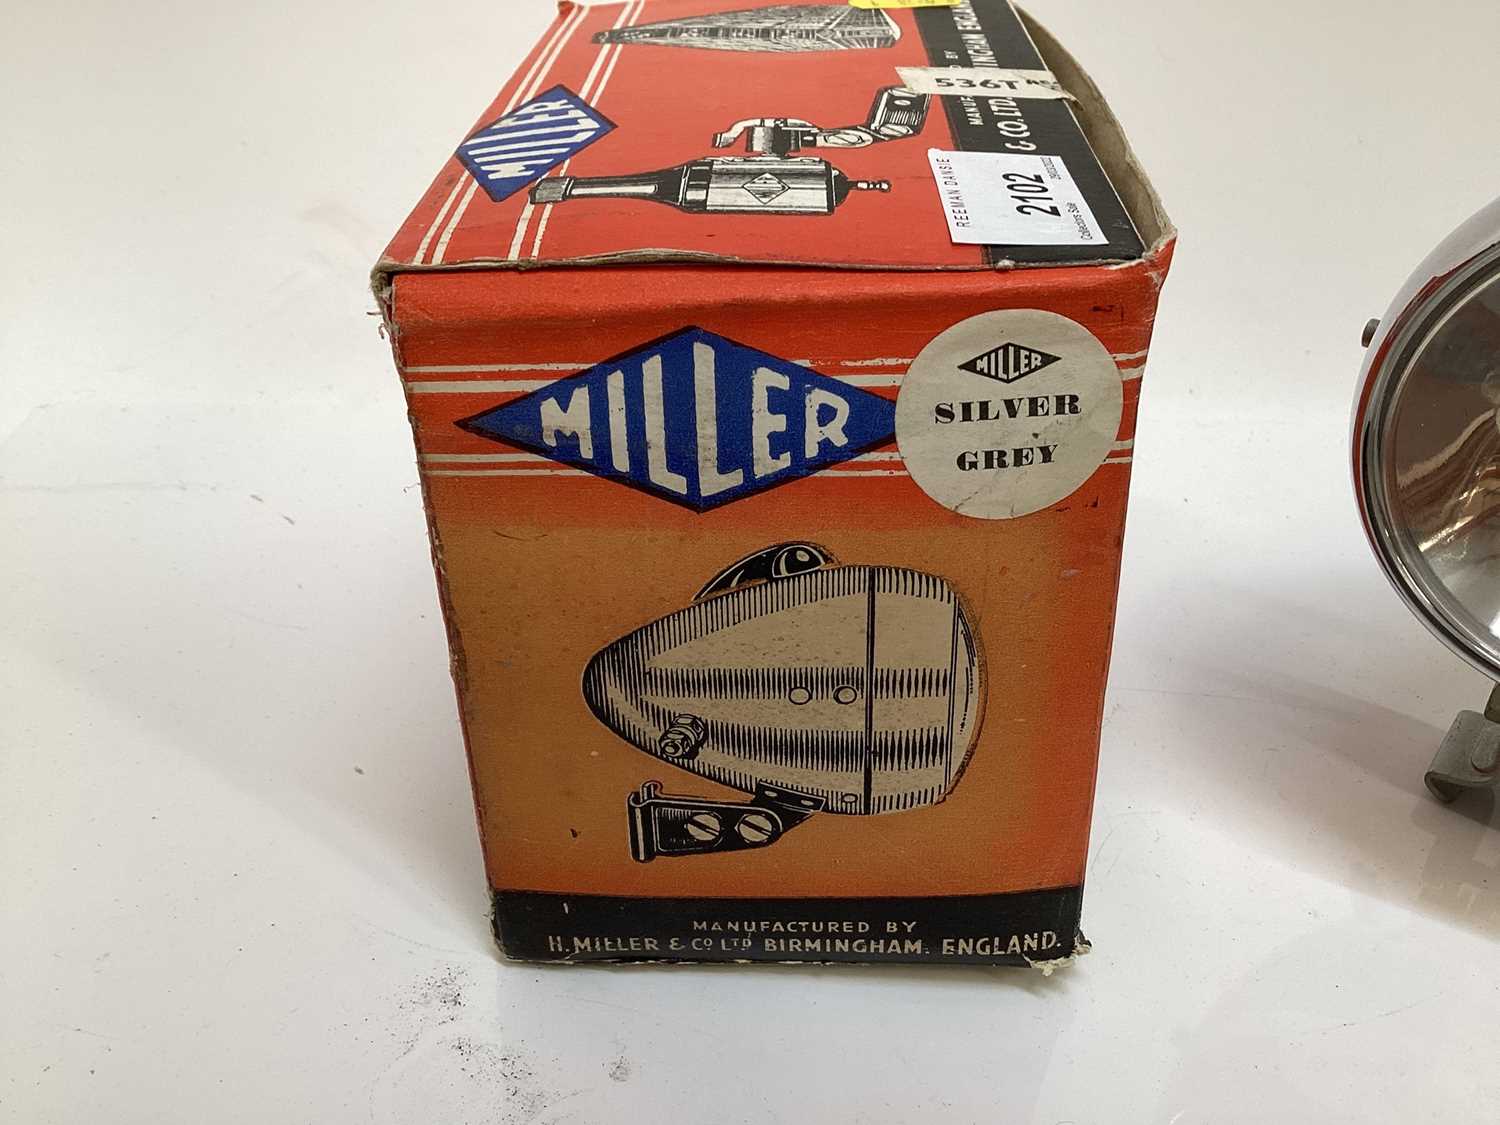 Vintage Miller cycle lamp and generator in original box - new old stock - Image 4 of 12